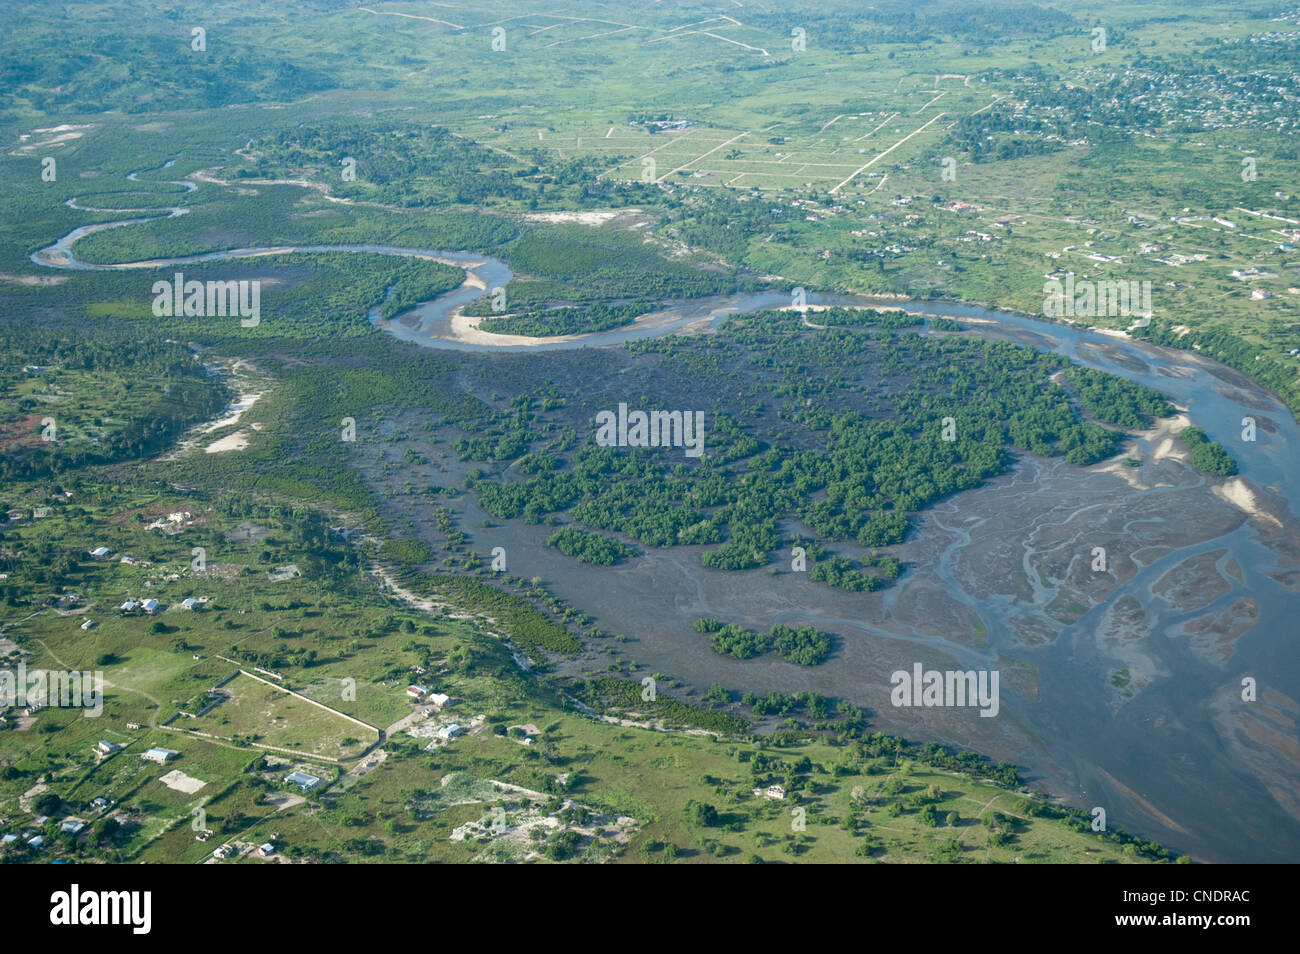 Mangrove forest in a river mouth, aerial view, Pwani Region, Tanzania Stock Photo